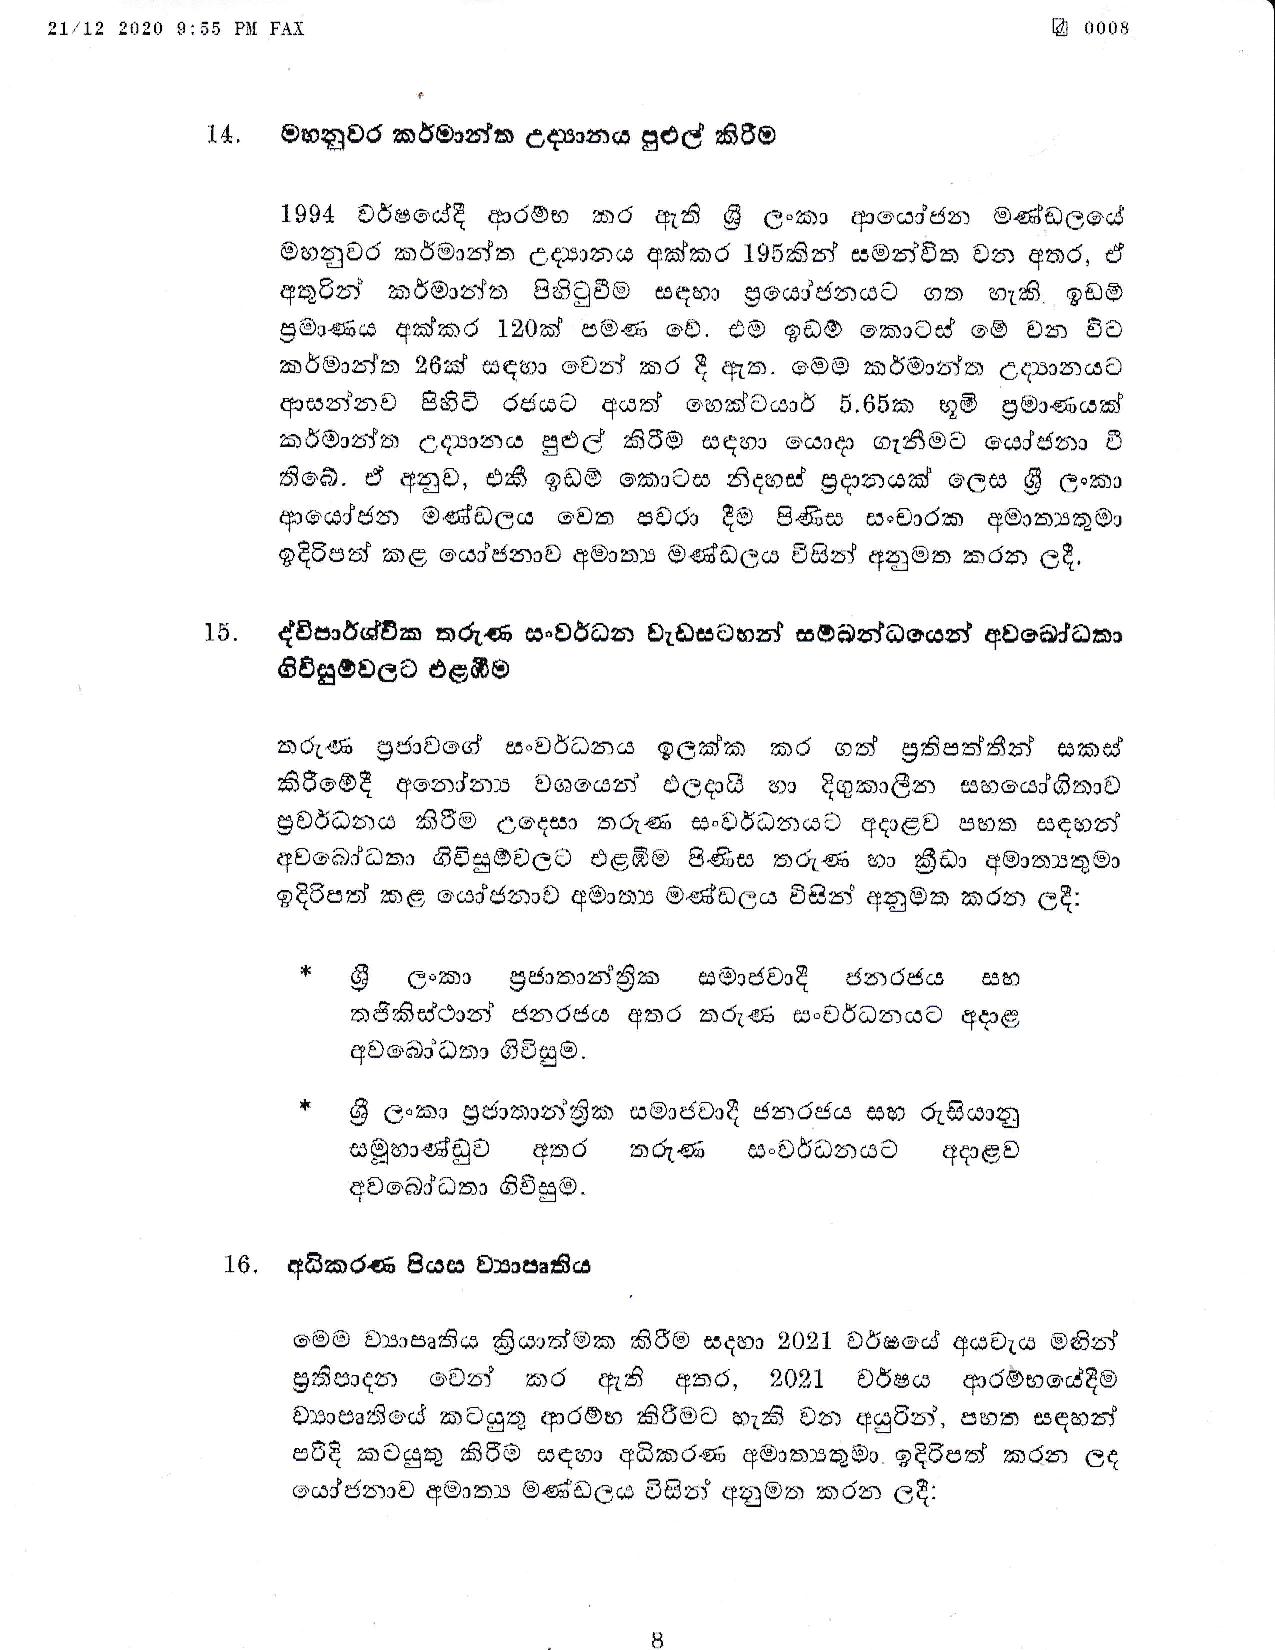 Cabinet Decision on 21.12.2020 page 008